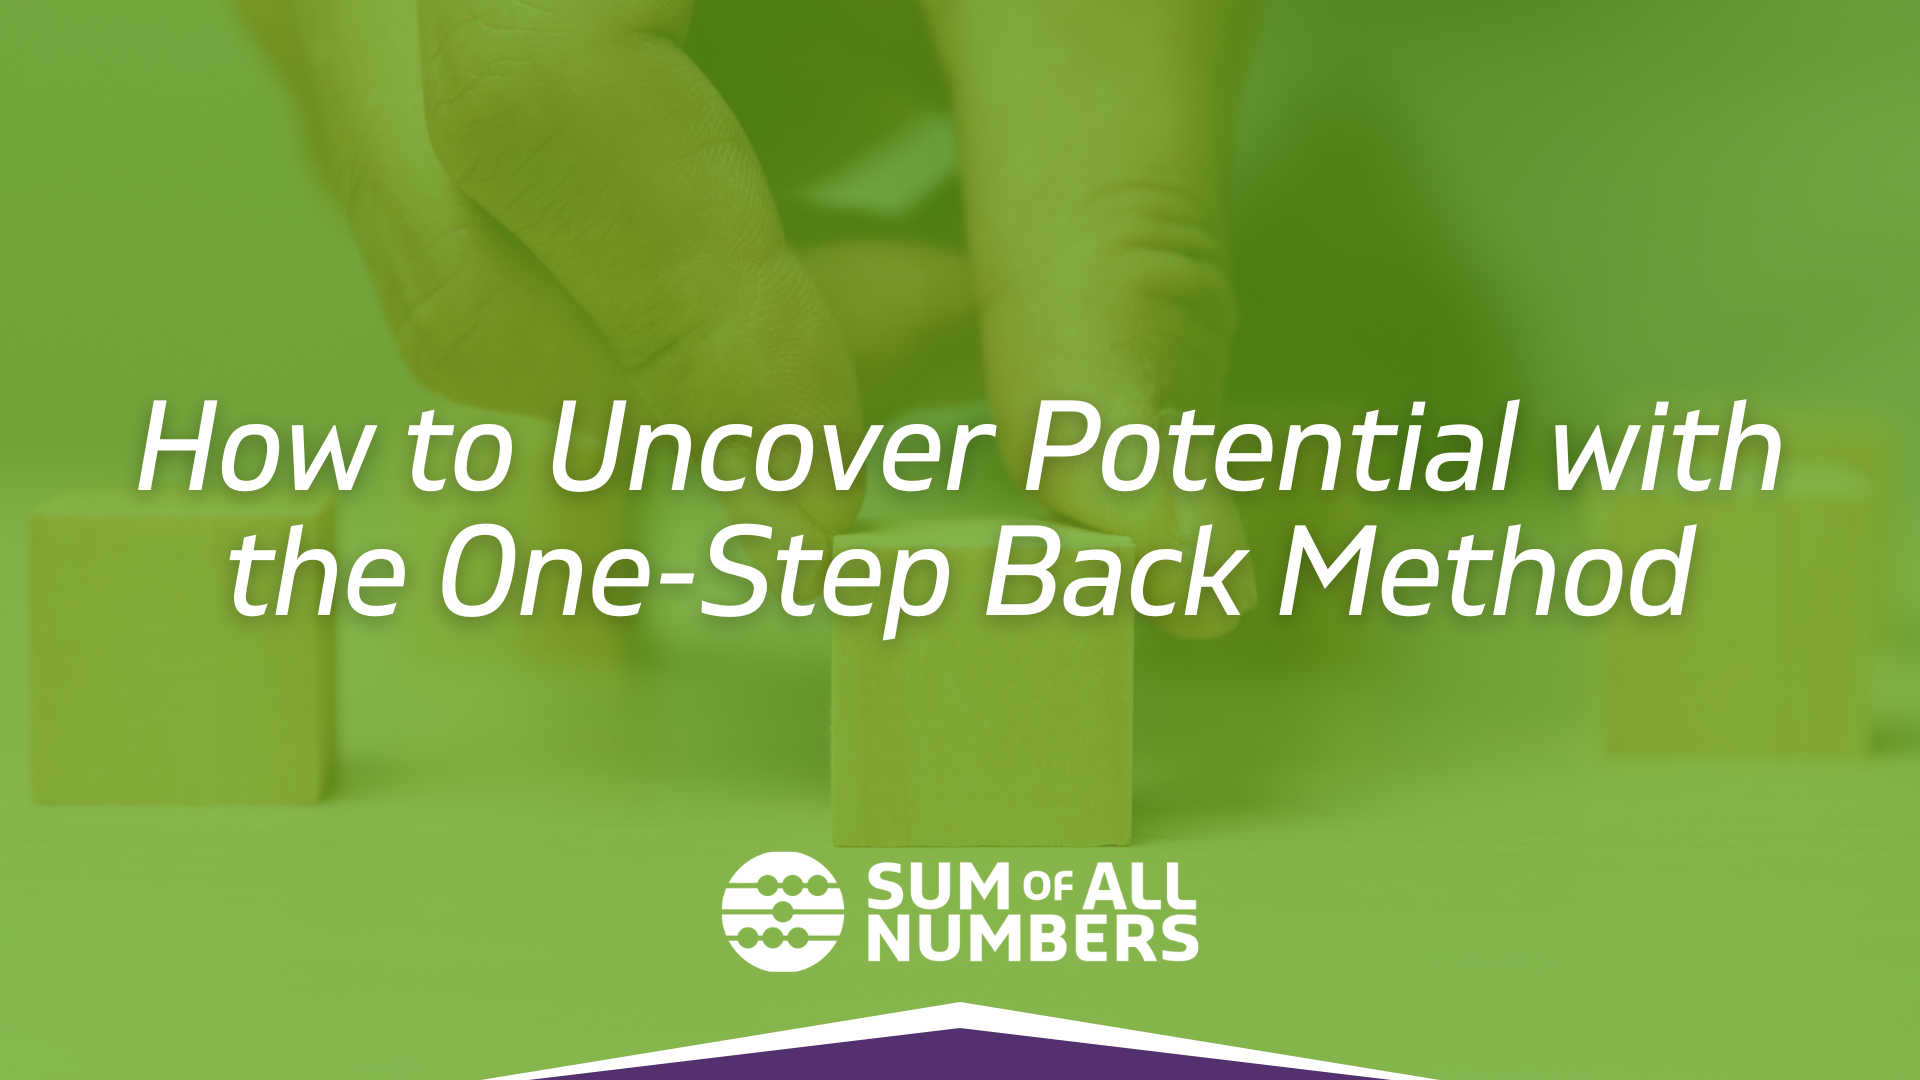 How to Uncover Potential with the One-Step Back Method